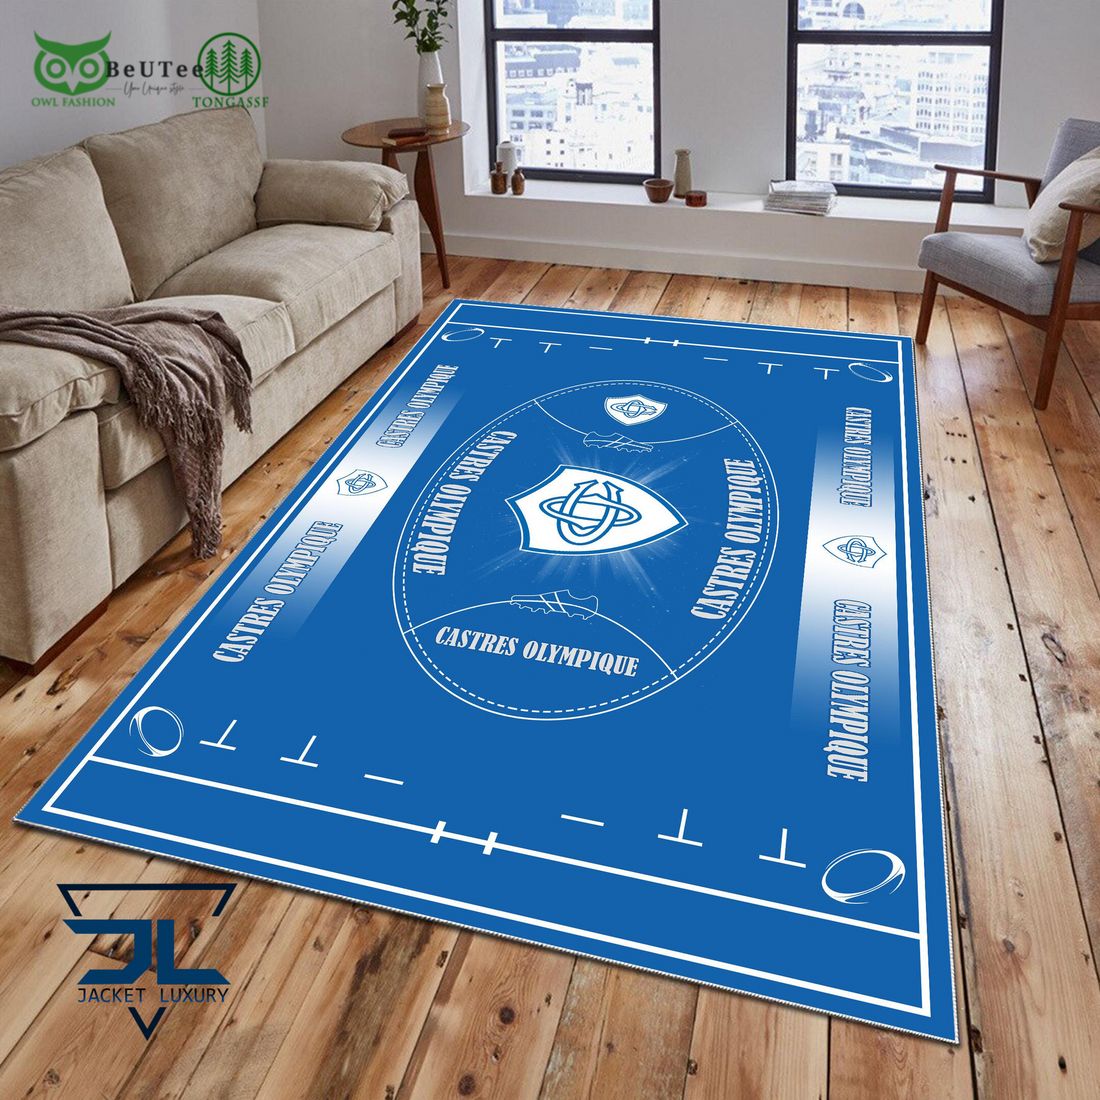 castres olympique french rugby carpet rug 1 Pncod